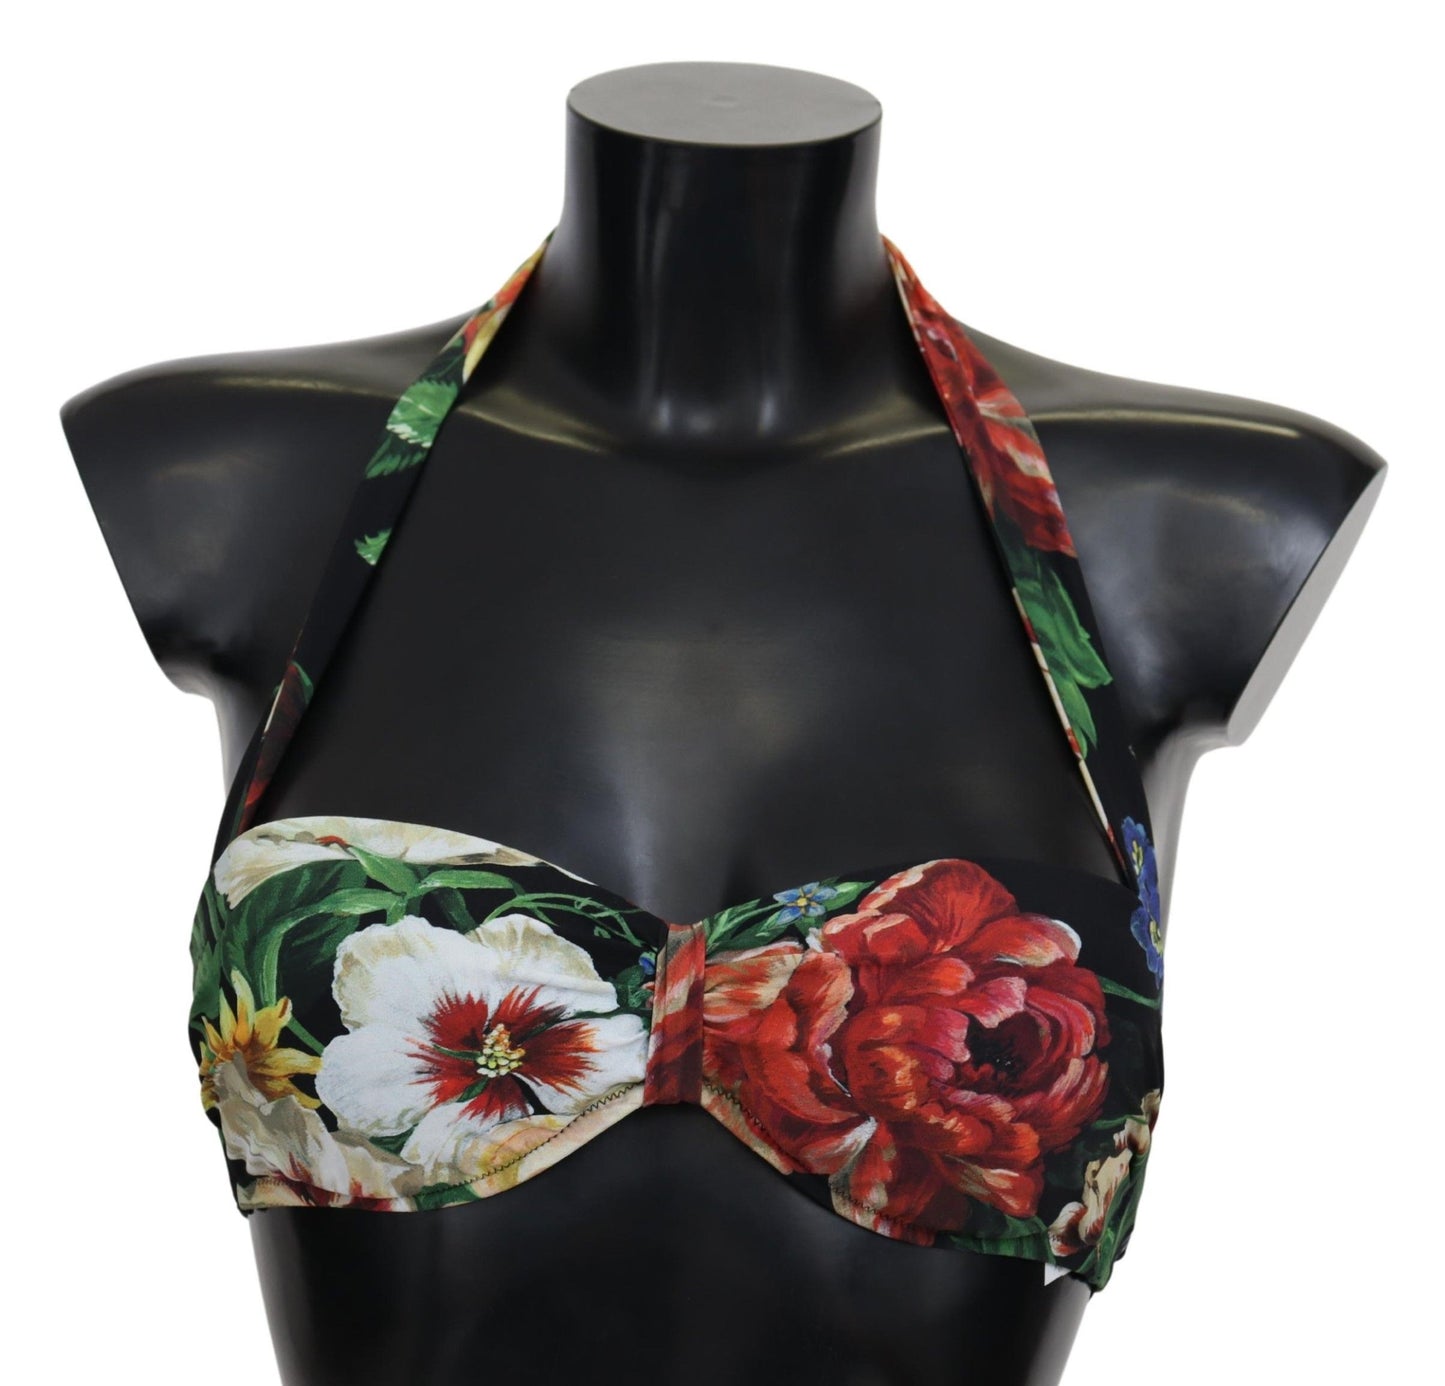 Black Floral Print Nylon Swimwear Bikini Tops - Designed by Dolce & Gabbana Available to Buy at a Discounted Price on Moon Behind The Hill Online Designer Discount Store